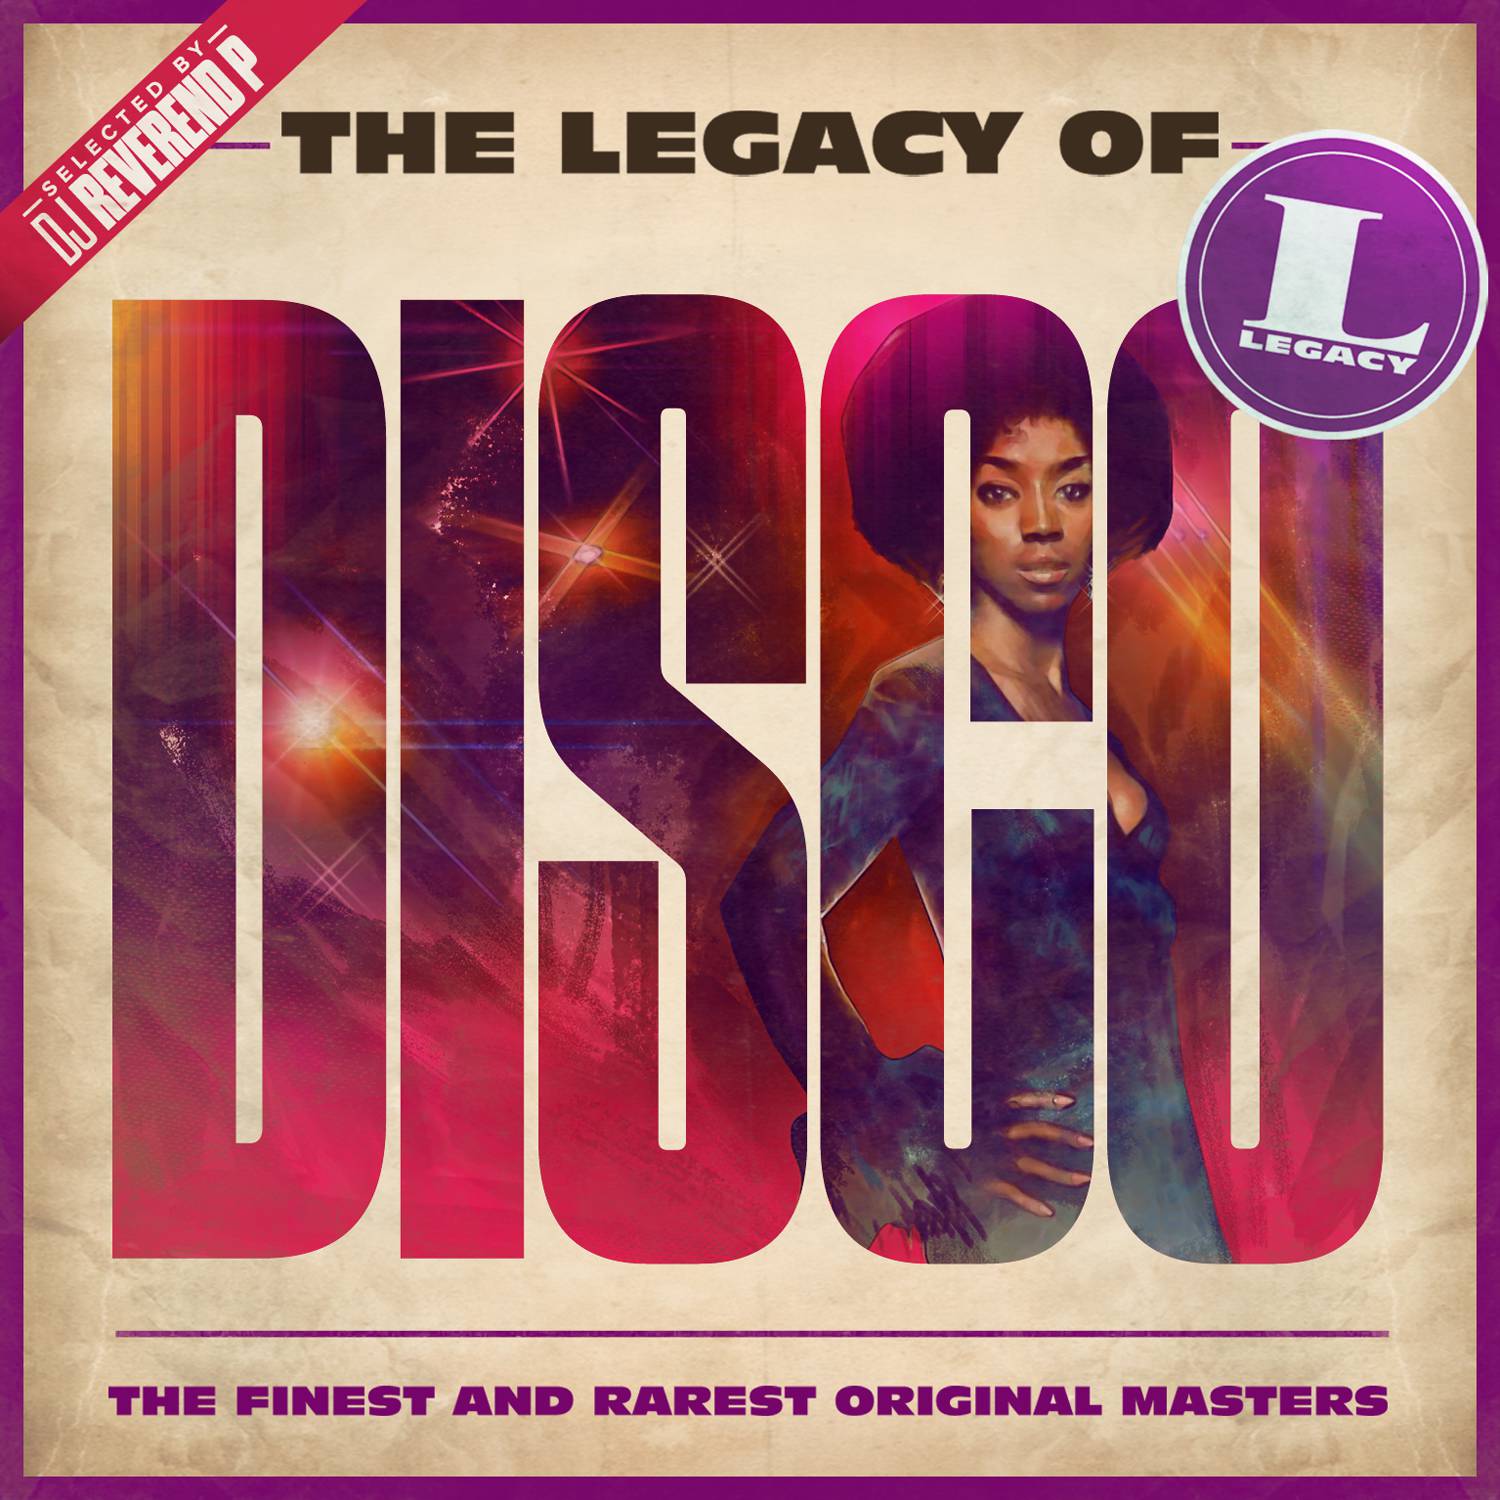 The Legacy of Disco